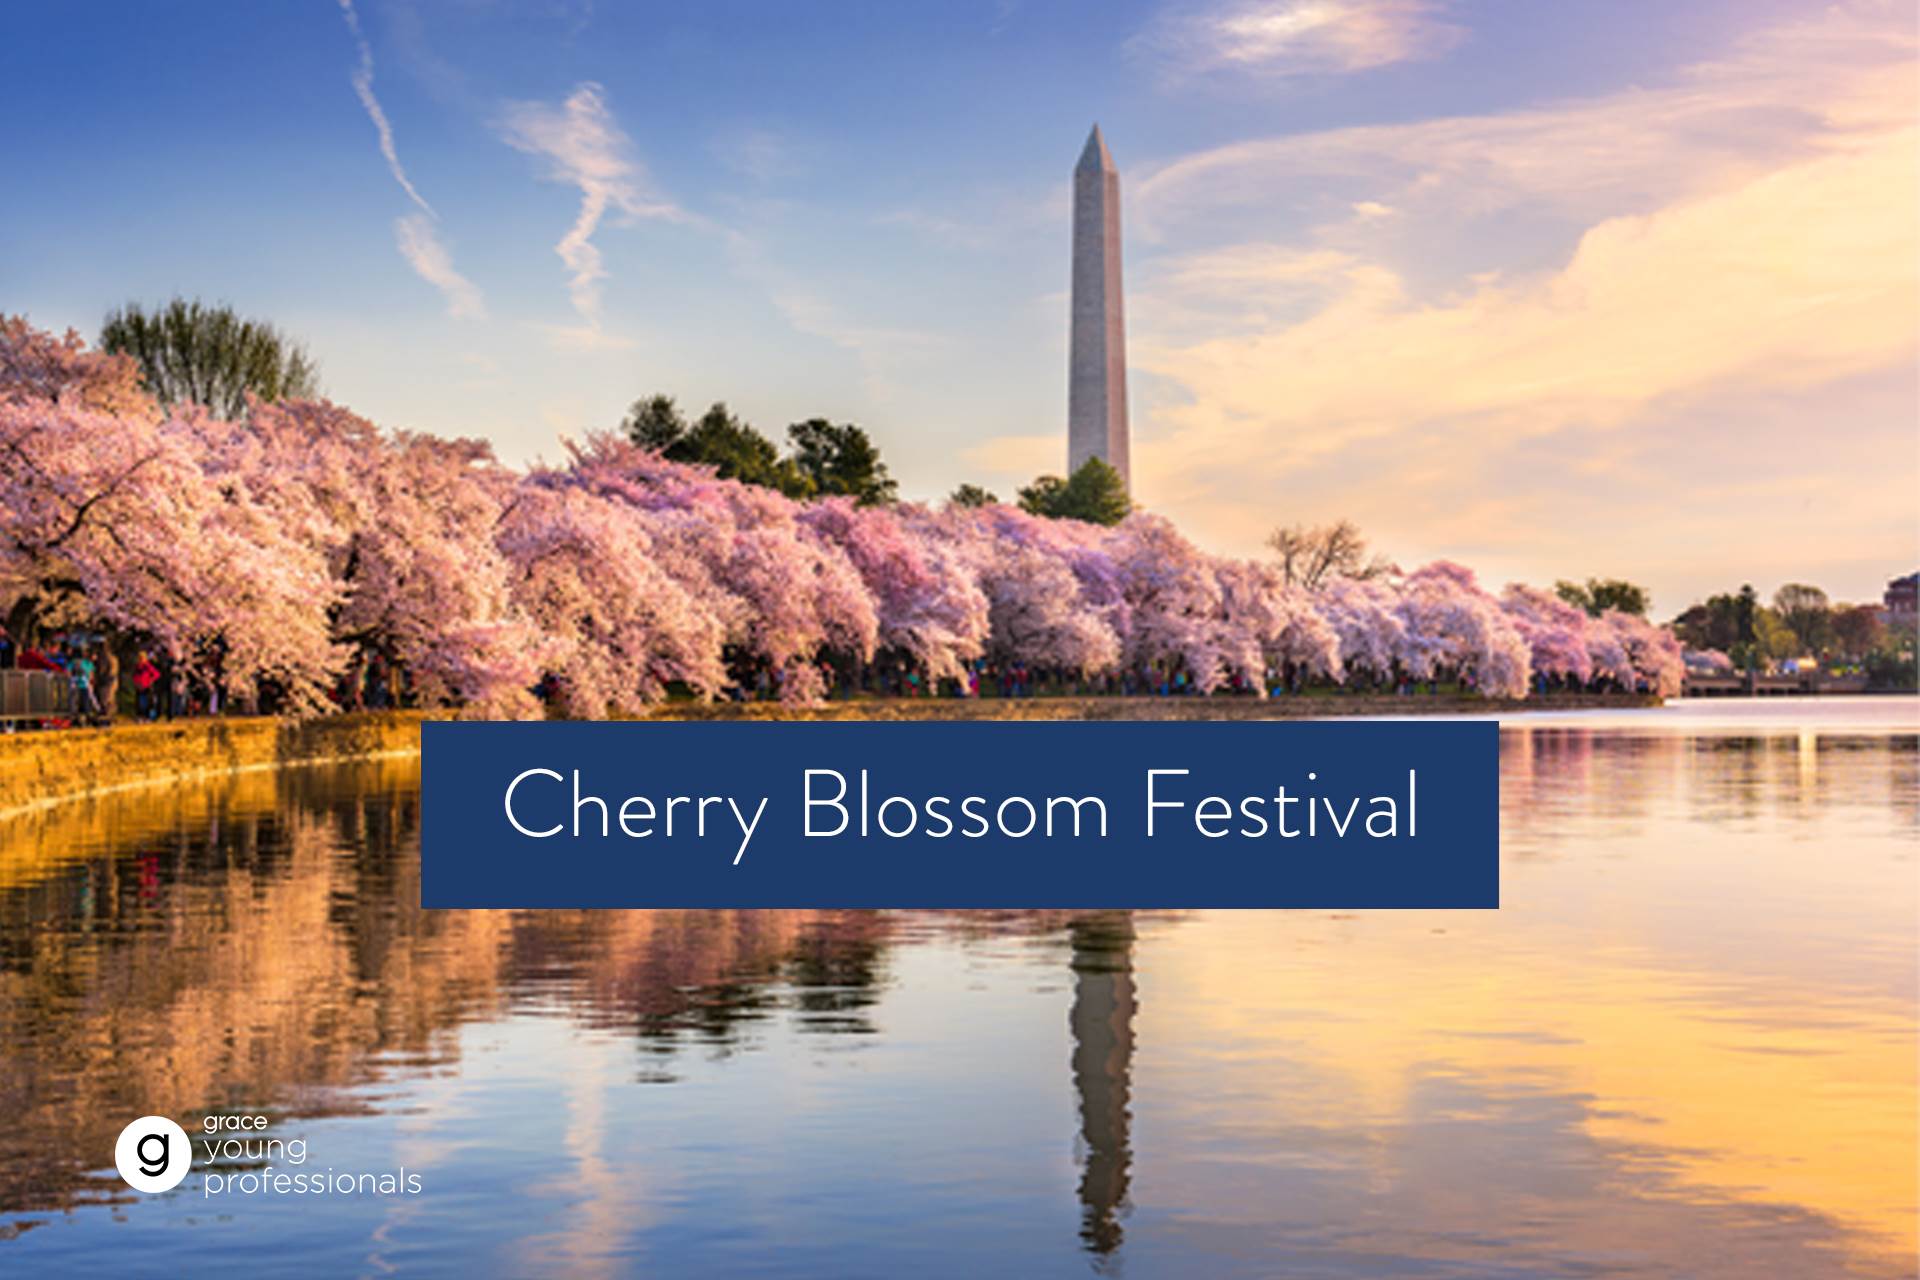 Link to Cherry Blossom Festival detail page